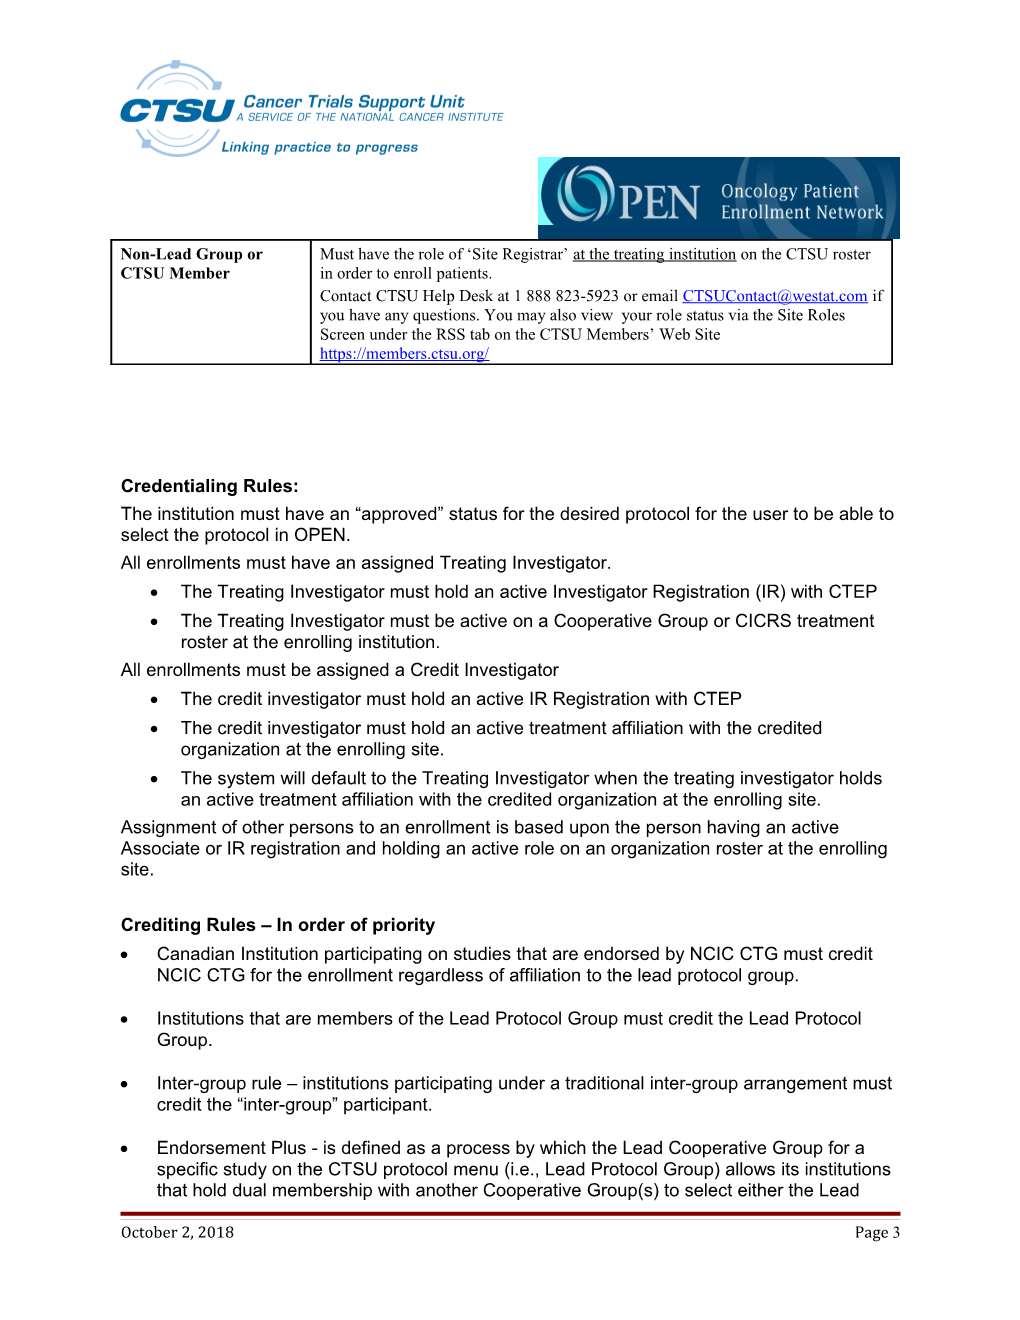 Guidelines for OPEN Access and Crediting